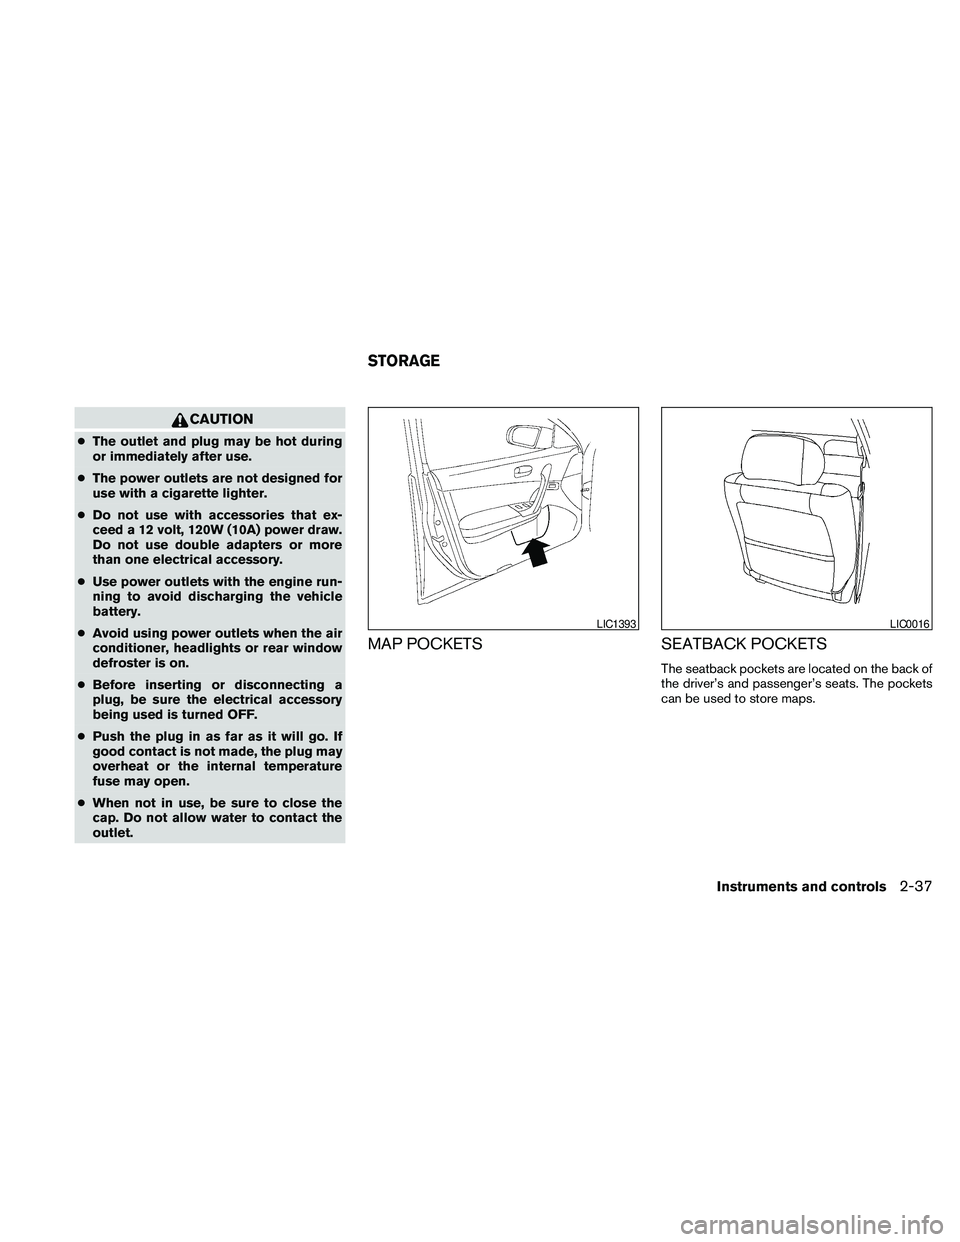 NISSAN MAXIMA 2010  Owner´s Manual CAUTION
cThe outlet and plug may be hot during
or immediately after use.
cThe power outlets are not designed for
use with a cigarette lighter.
cDo not use with accessories that ex-
ceed a 12 volt, 120